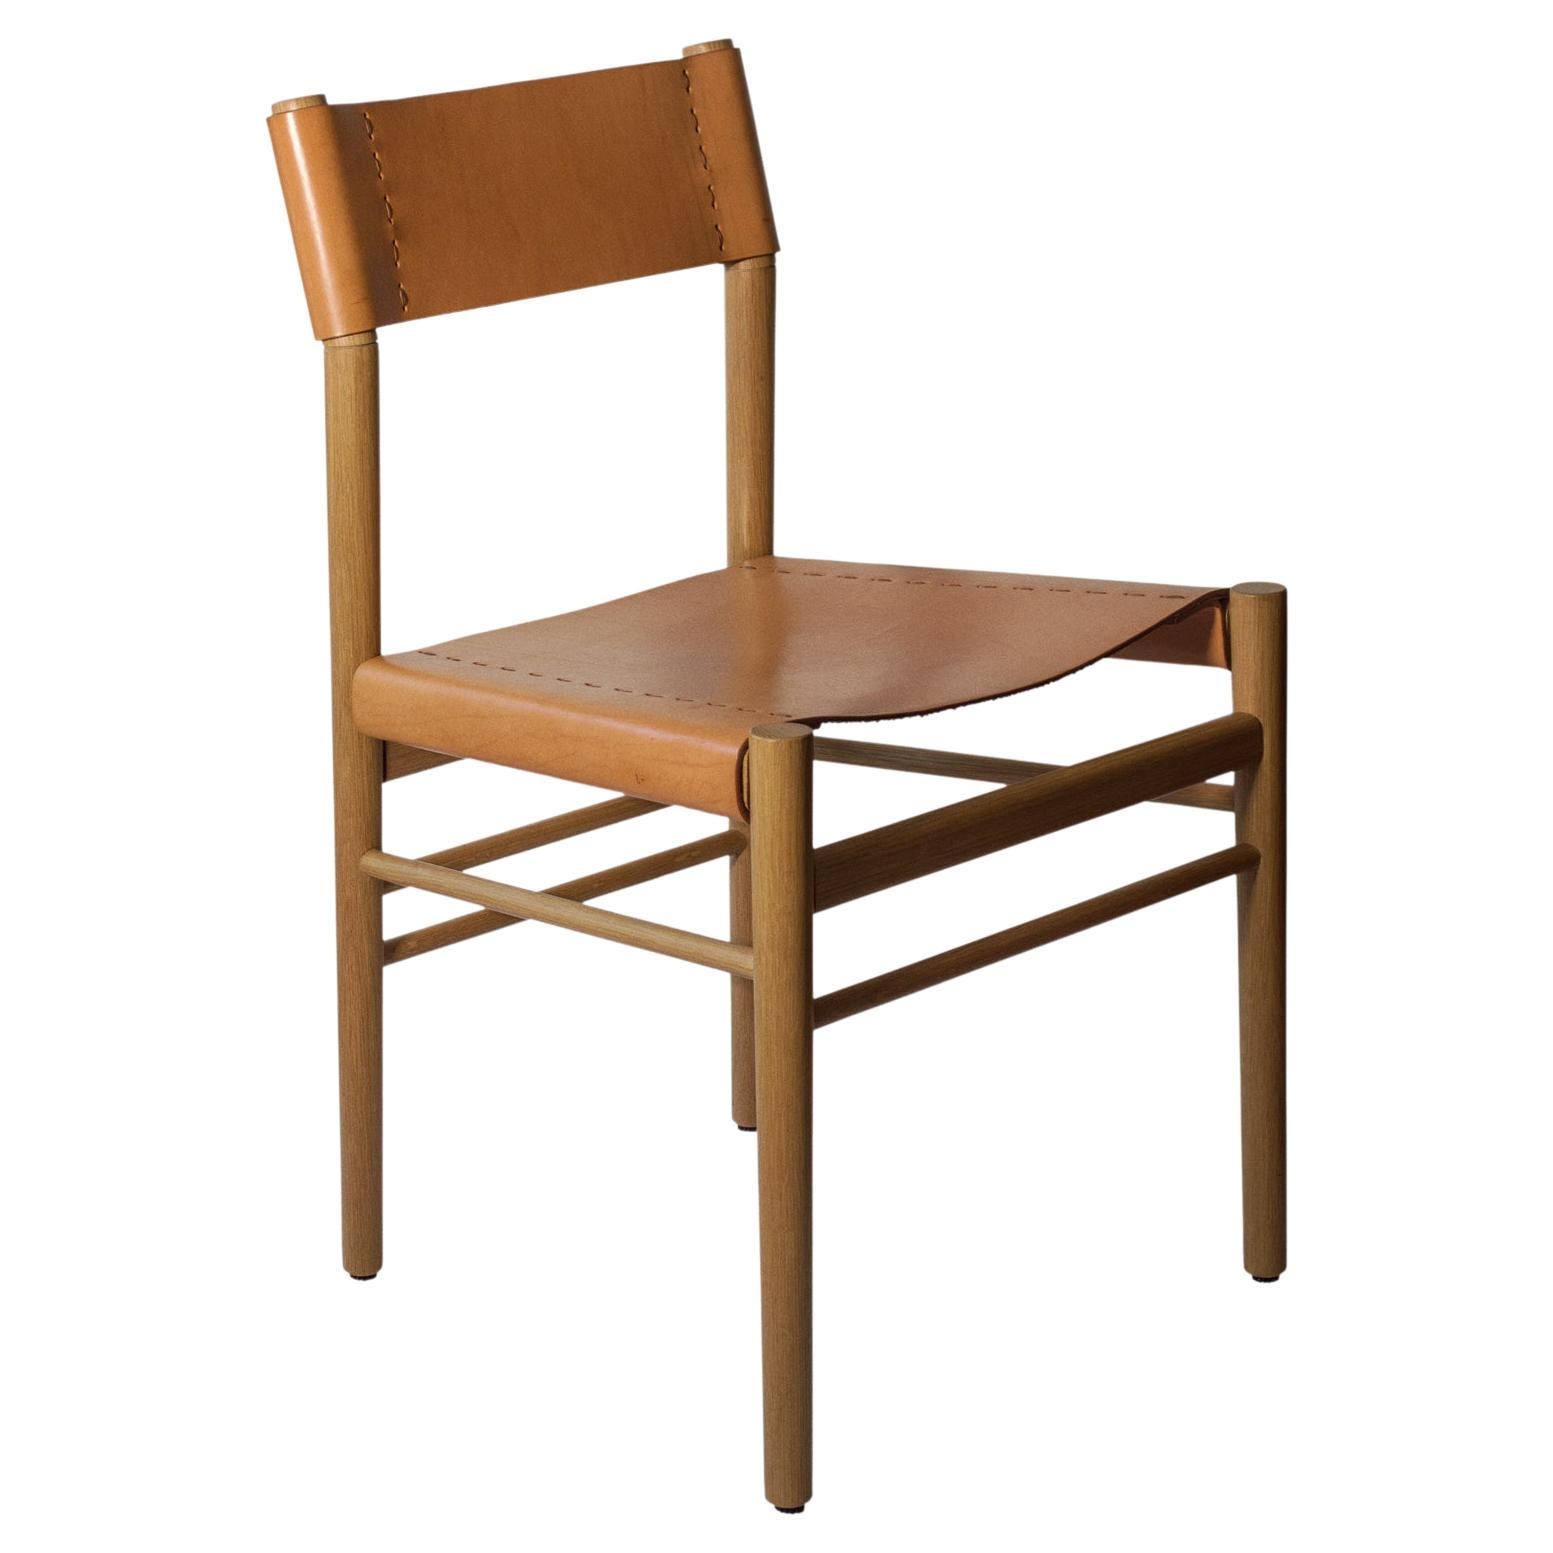 Scriba Contemporary Oak and Leather Dining Chair